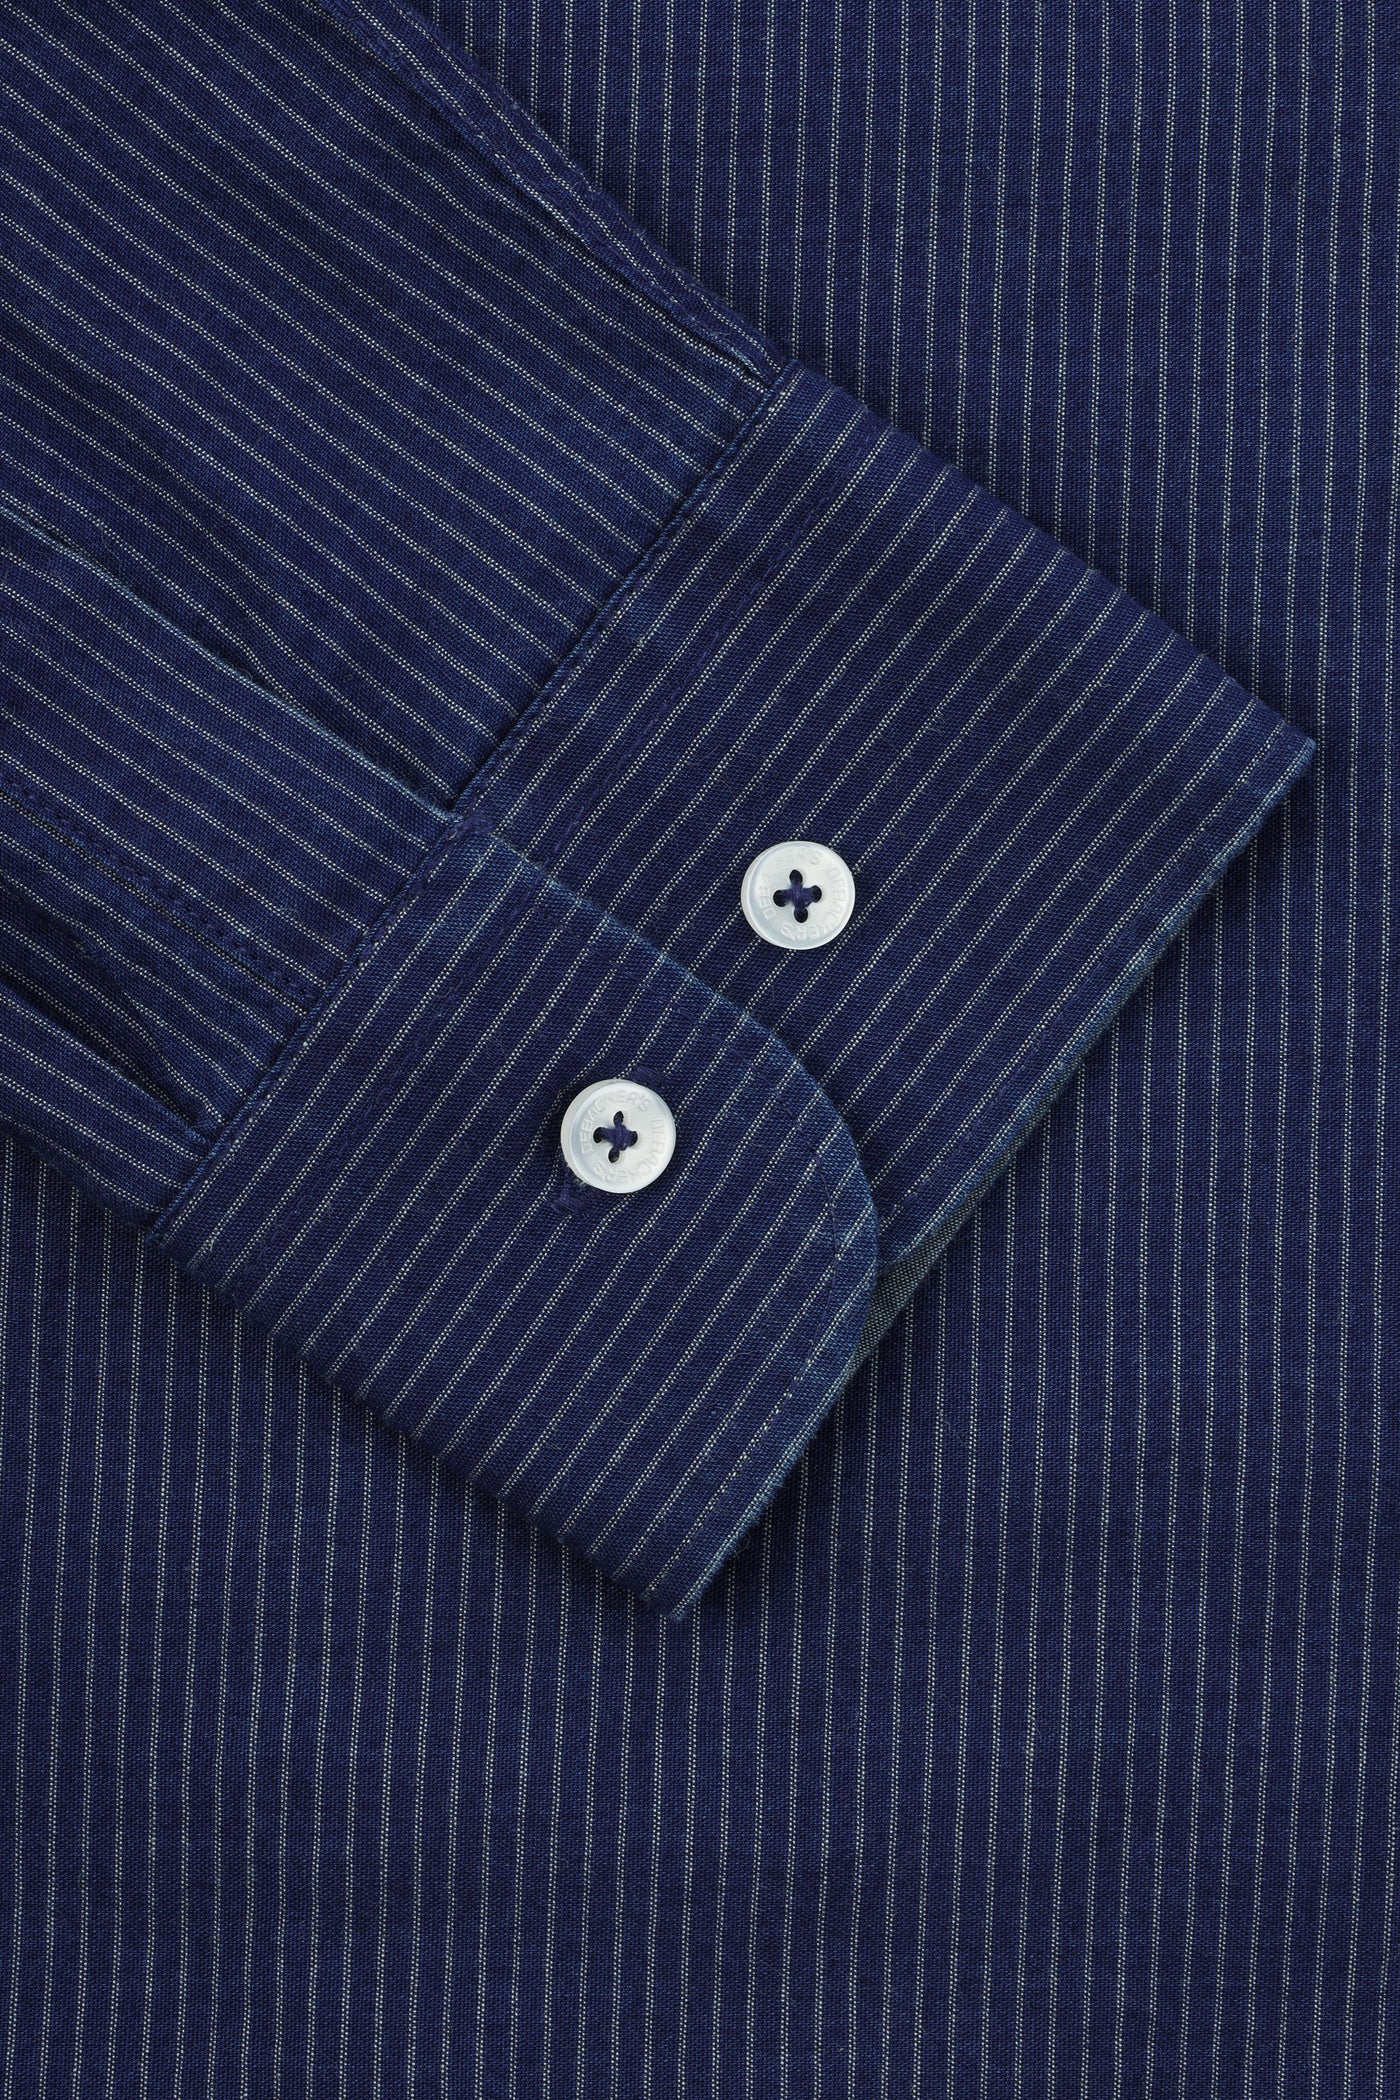 Striped Navy Cotton Casual Shirt